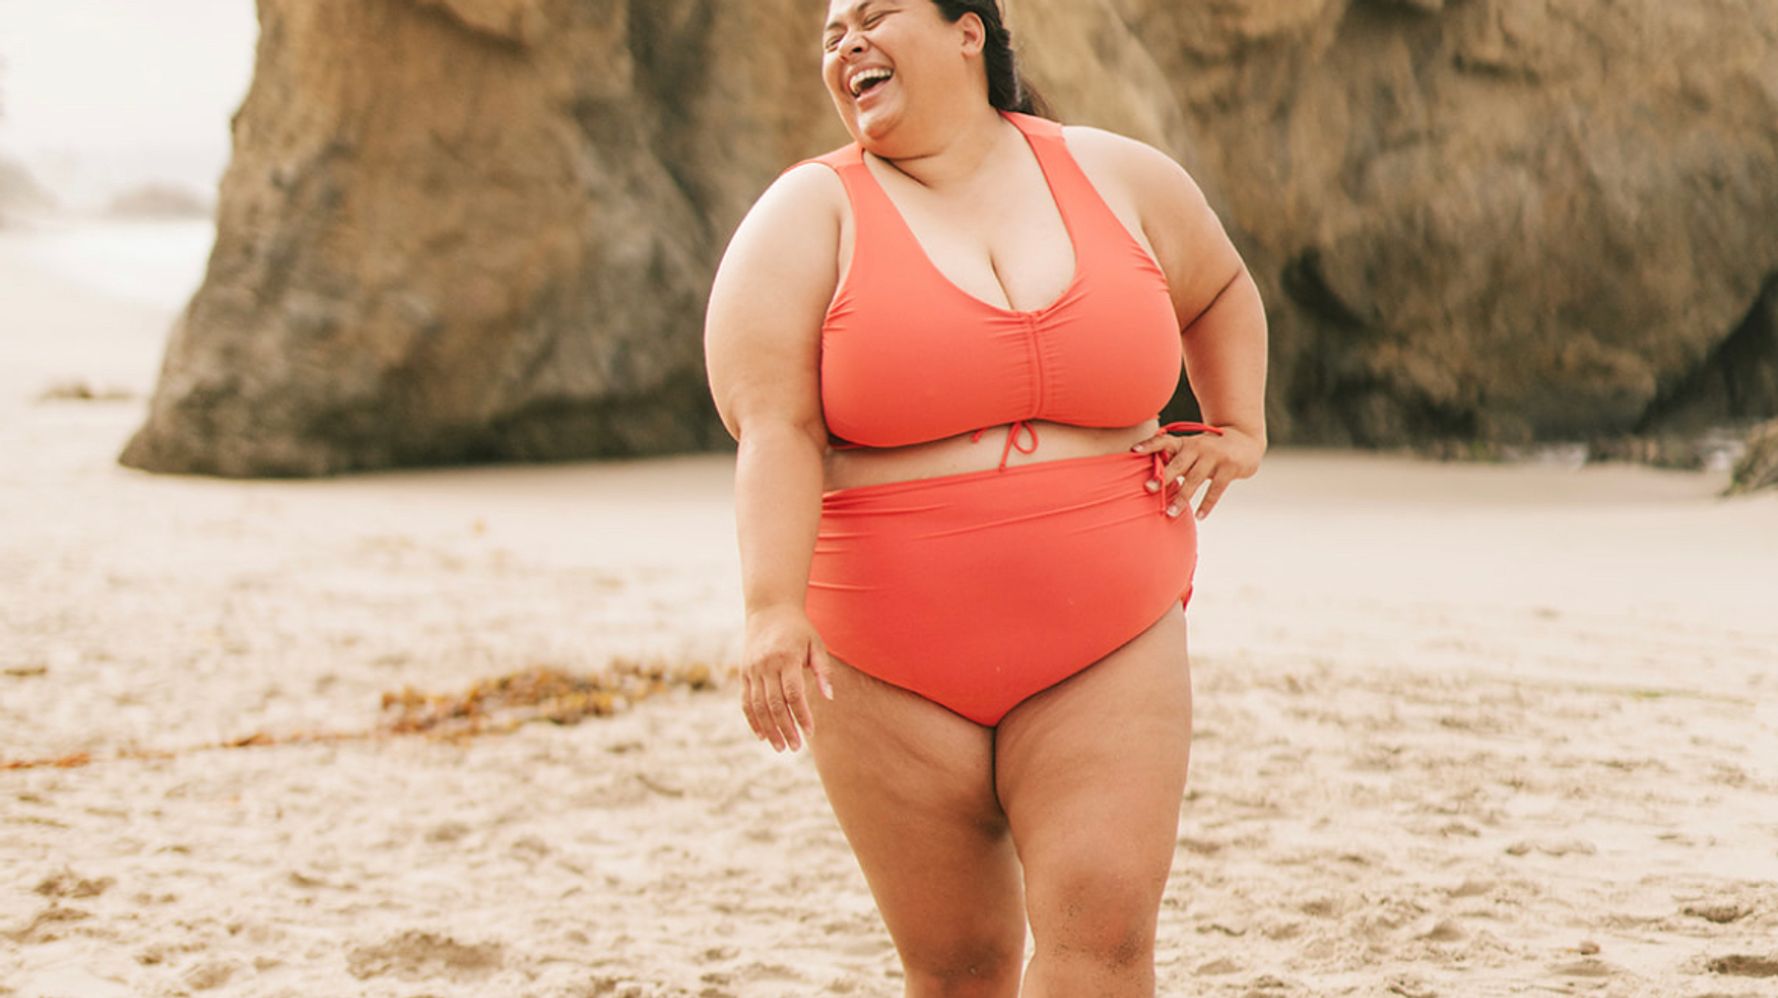 Chubby Girl Nudist Beach - I Became A Bikini And Lingerie Model When I Was At My Highest Weight Ever |  HuffPost HuffPost Personal